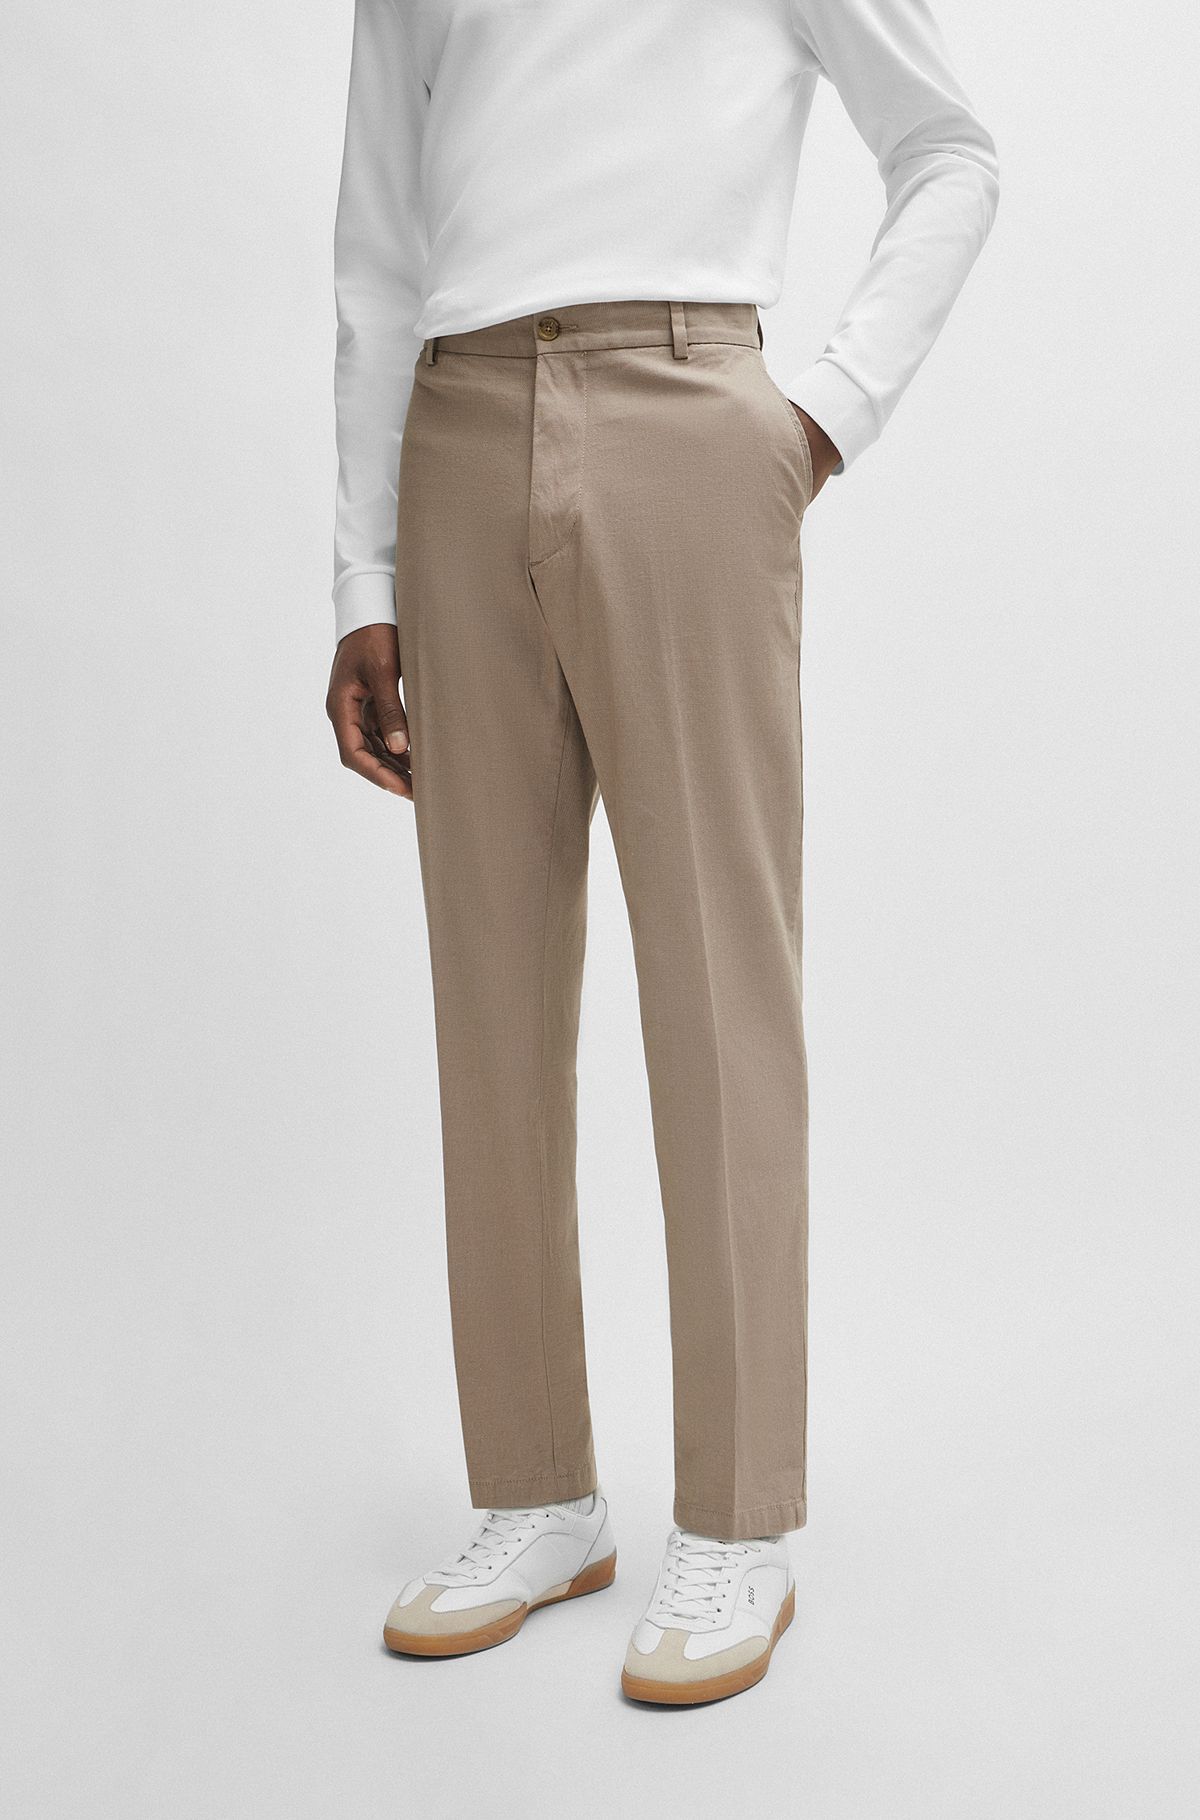 Slim Fit trousers - Beige/Checked - Men